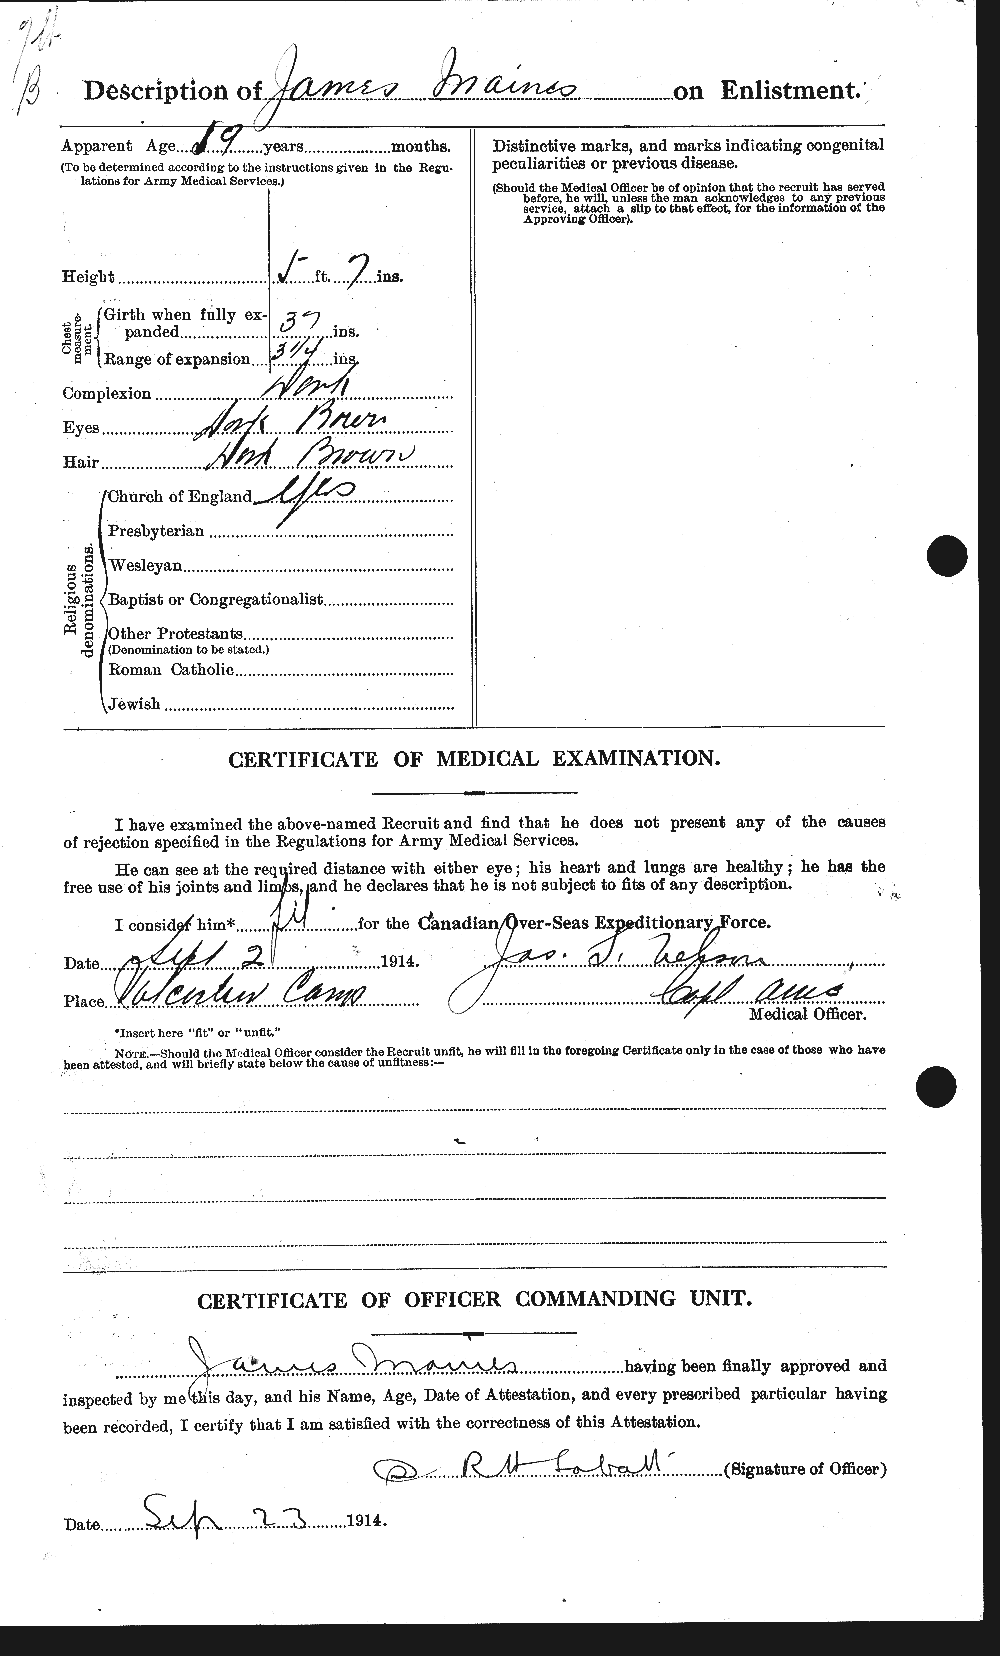 Personnel Records of the First World War - CEF 471481b